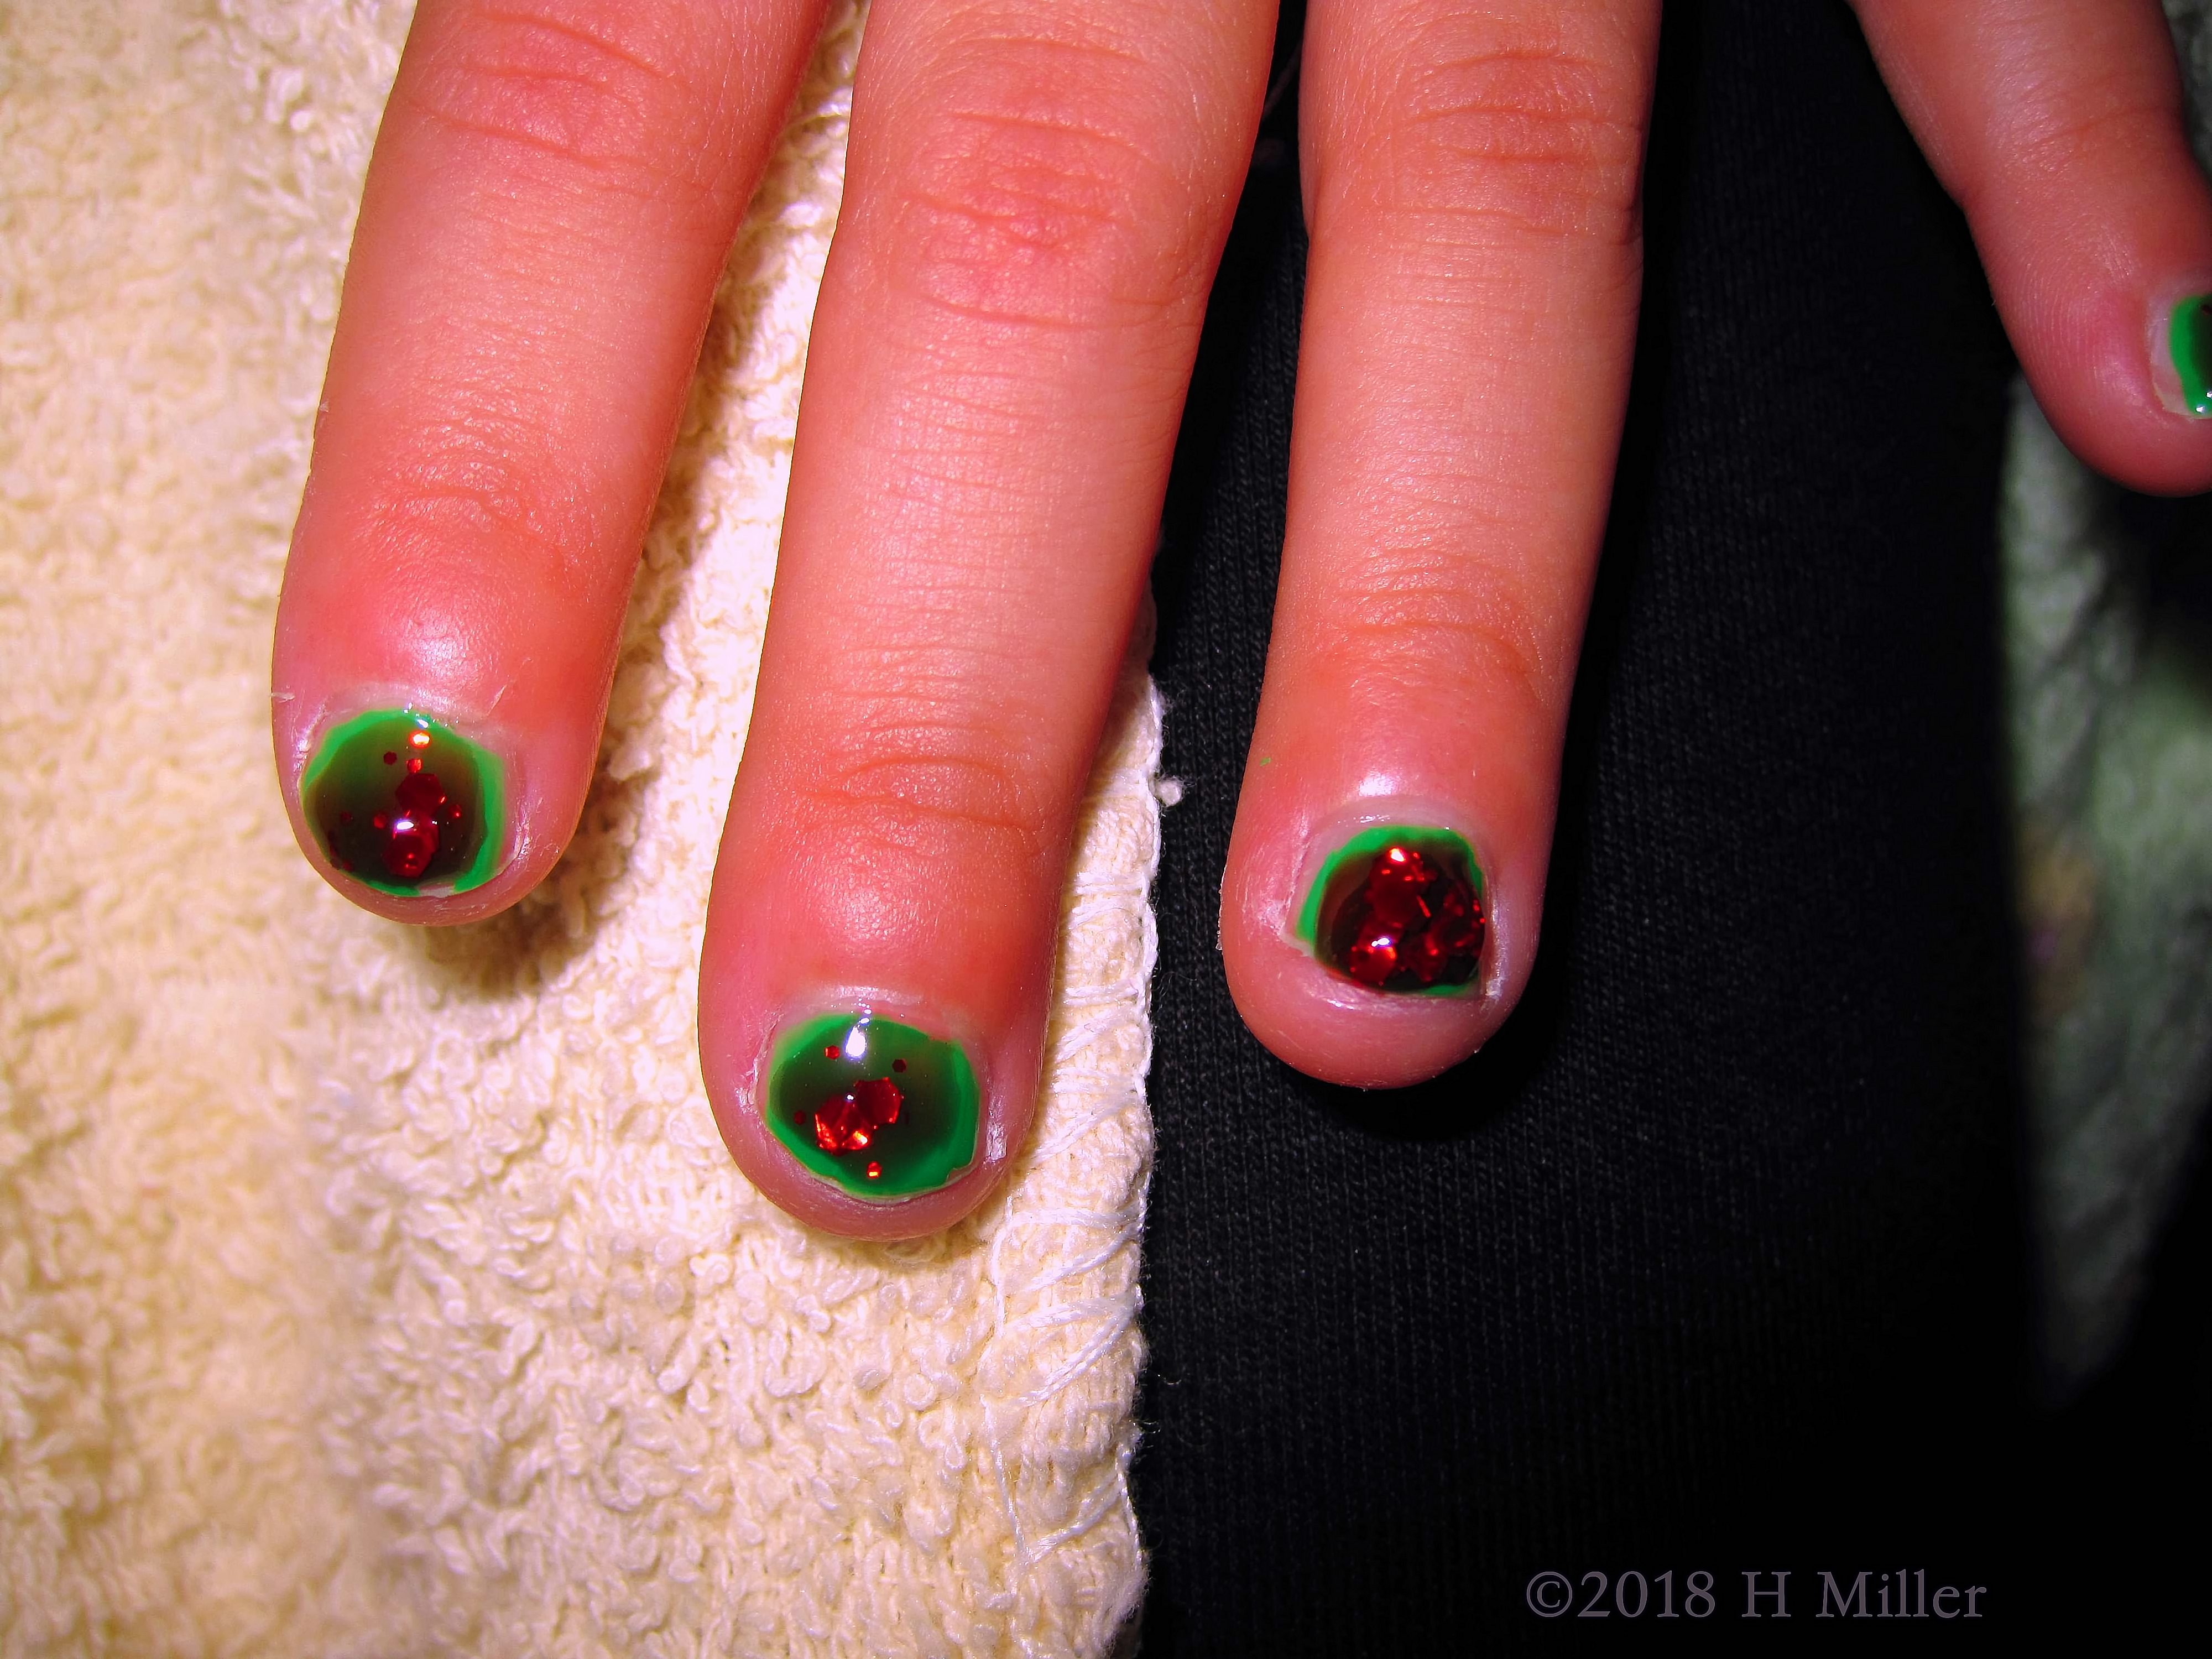 Cute Kids Manicure With Red Glitter Over Green. 